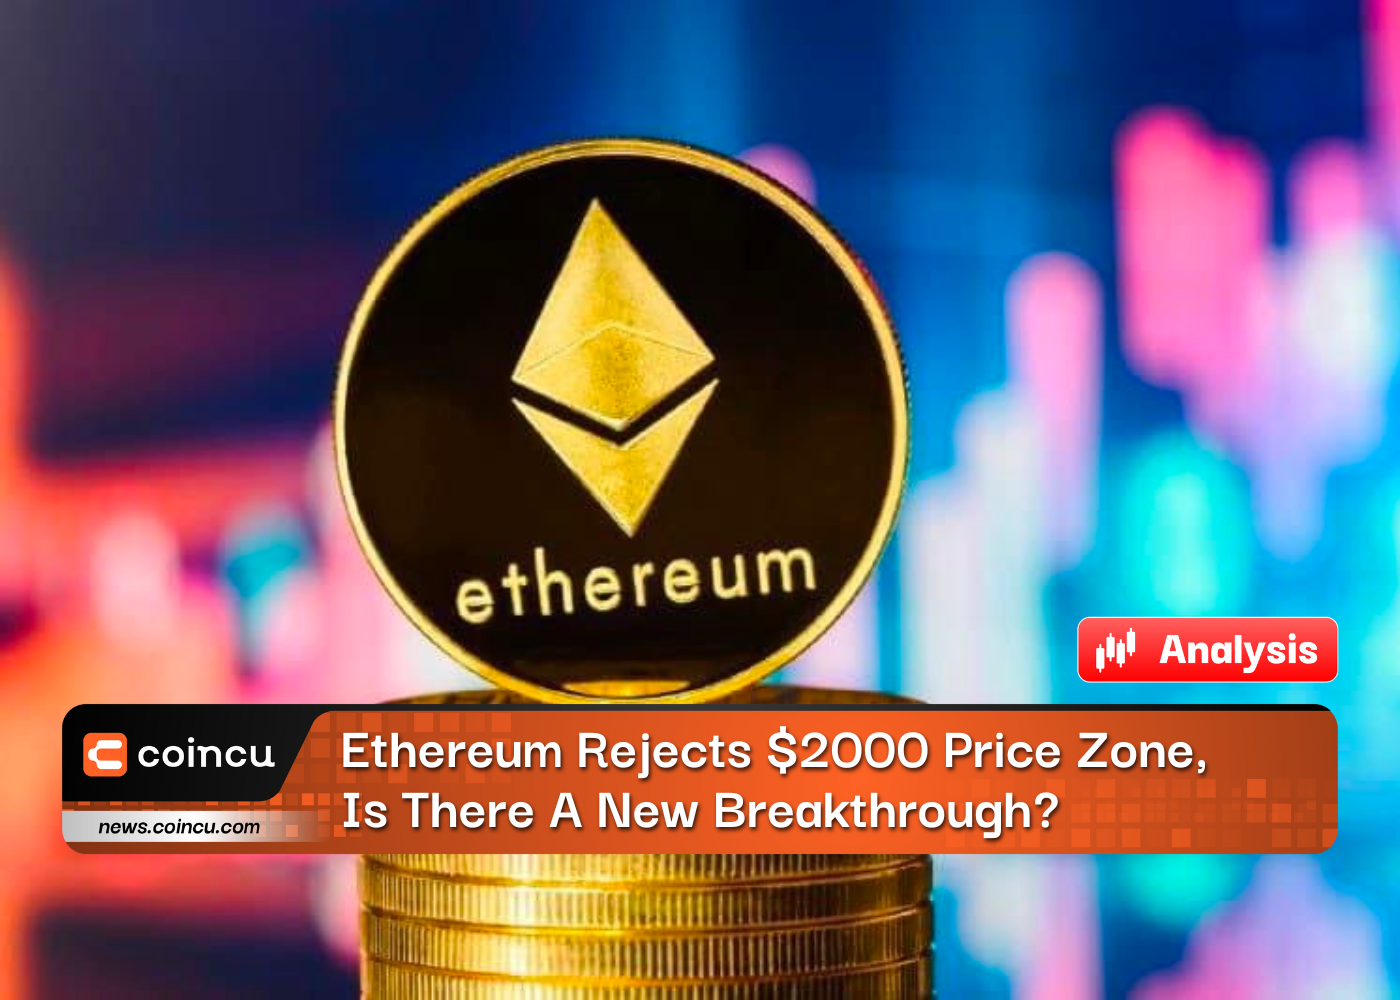 Ethereum Rejects $2000 Price Zone, Is There A New Breakthrough?